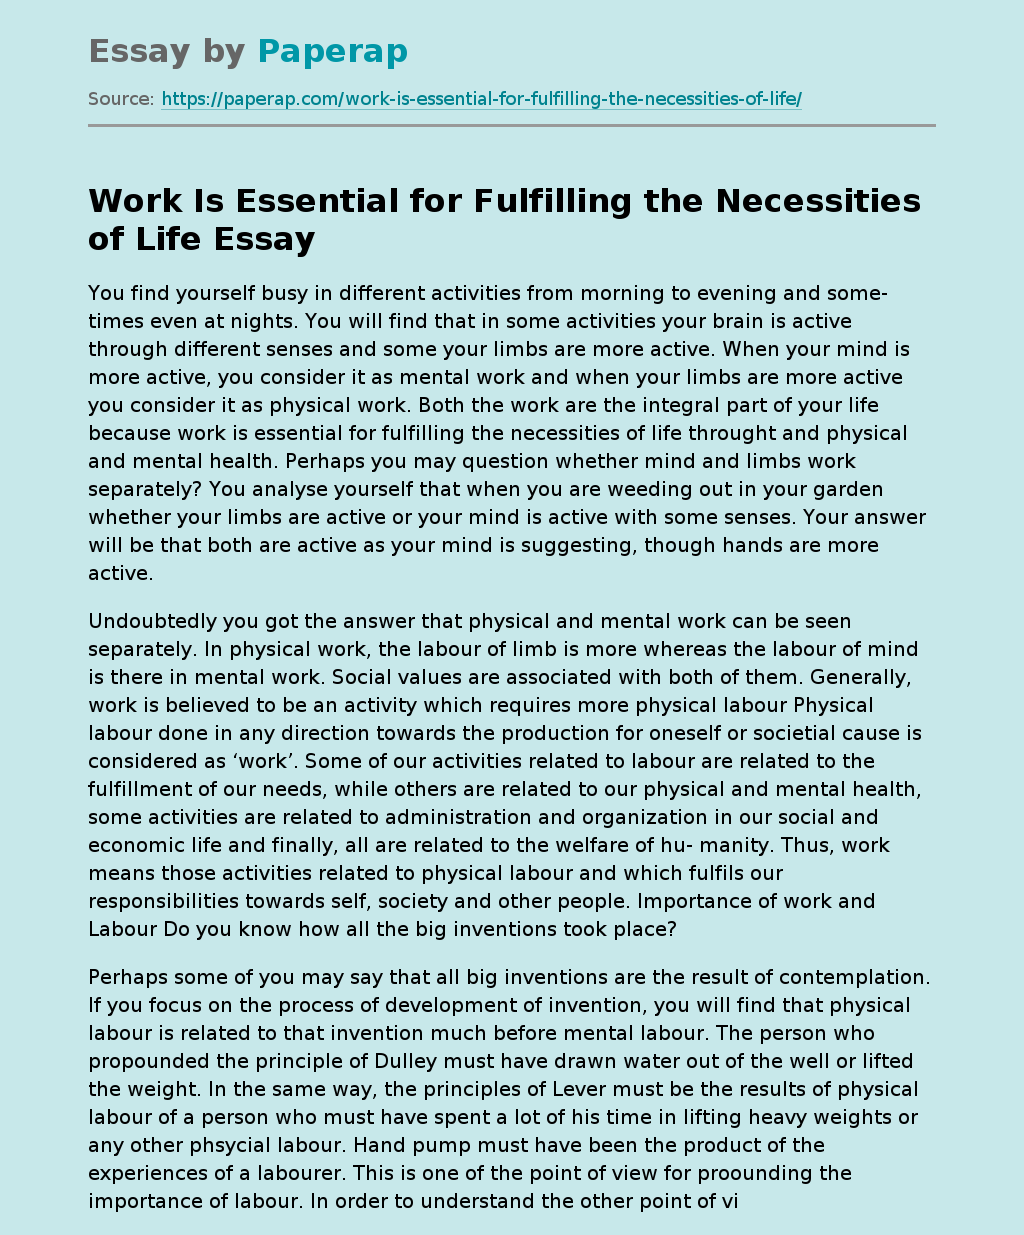 Work Is Essential for Fulfilling the Necessities of Life